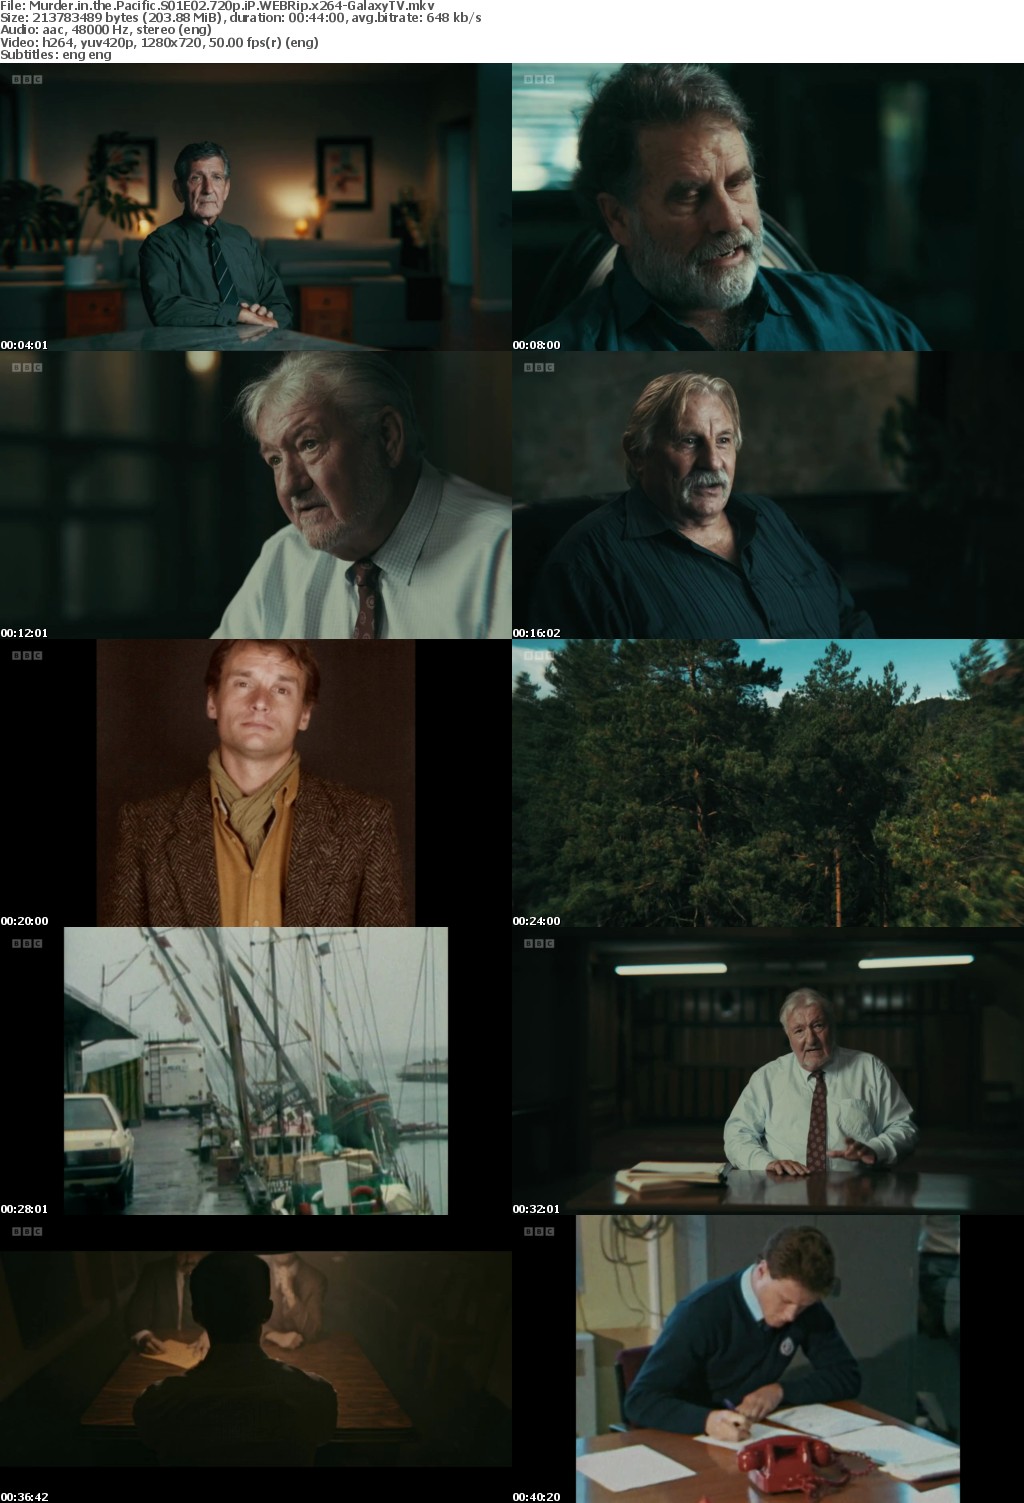 Murder in the Pacific S01 COMPLETE 720p iP WEBRip x264-GalaxyTV